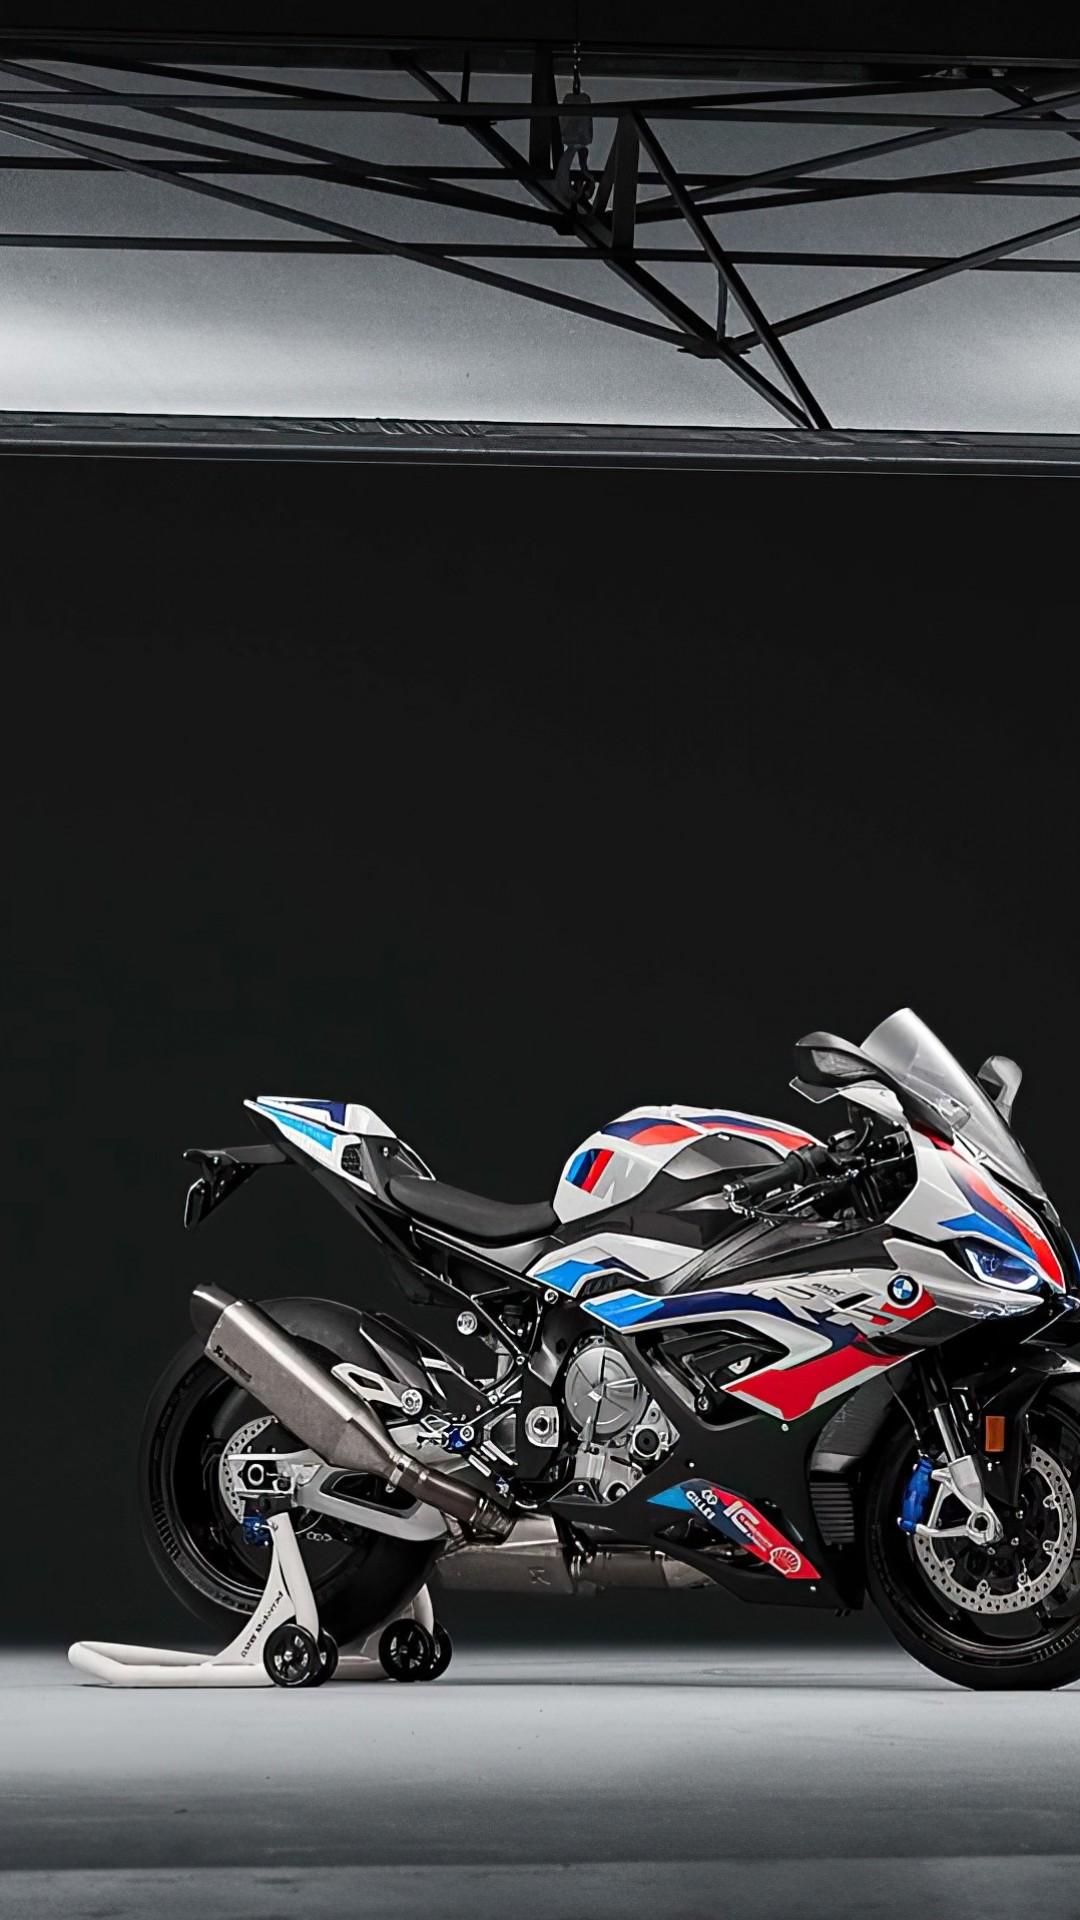 BMW M 1000 RR Wallpapers - Top Free BMW M 1000 RR Backgrounds ...